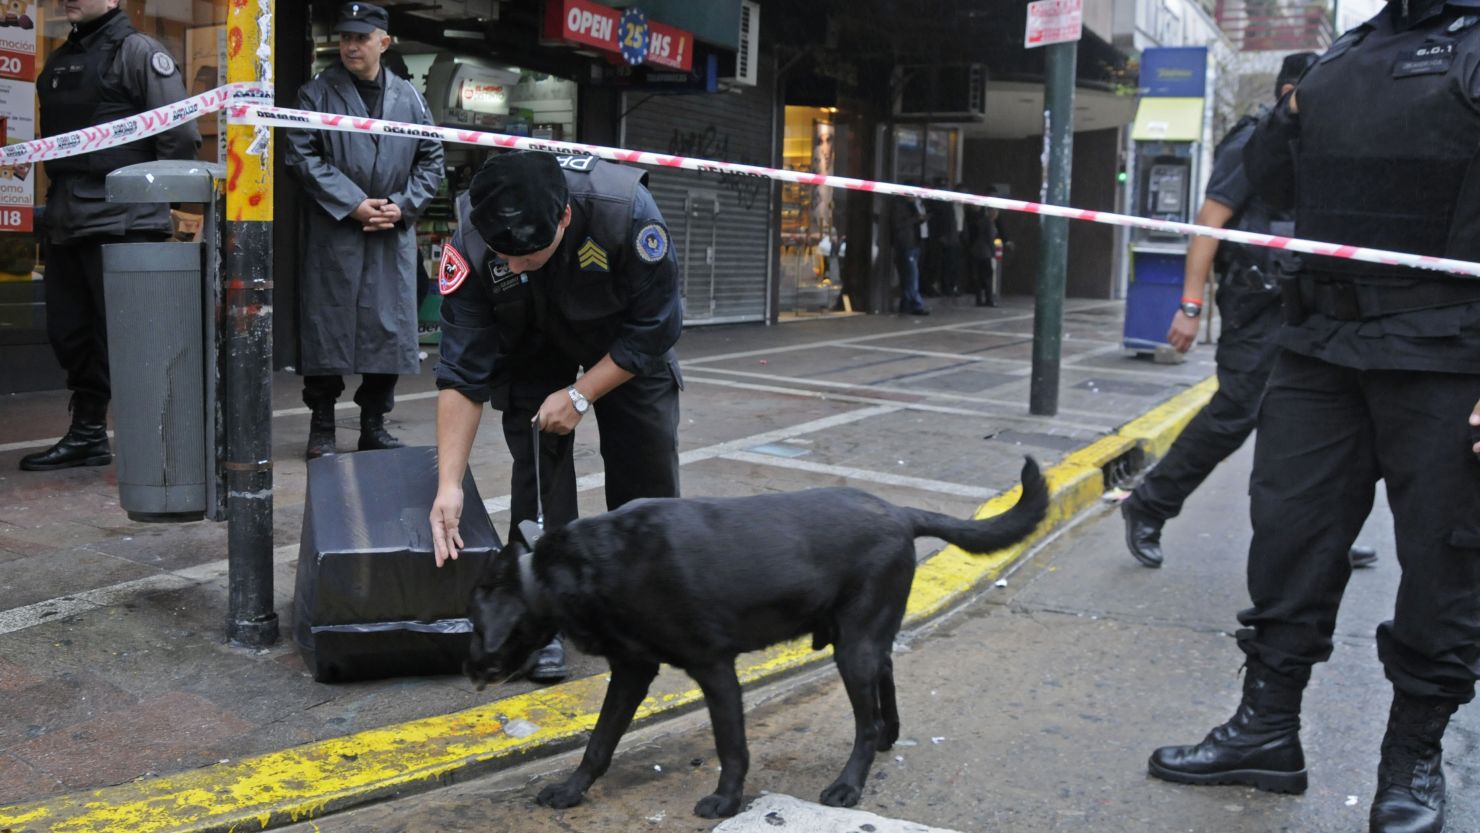 A bomb was defused at a Buenos Aires theater Tuesday, a day before a former Colombian president was set to speak.